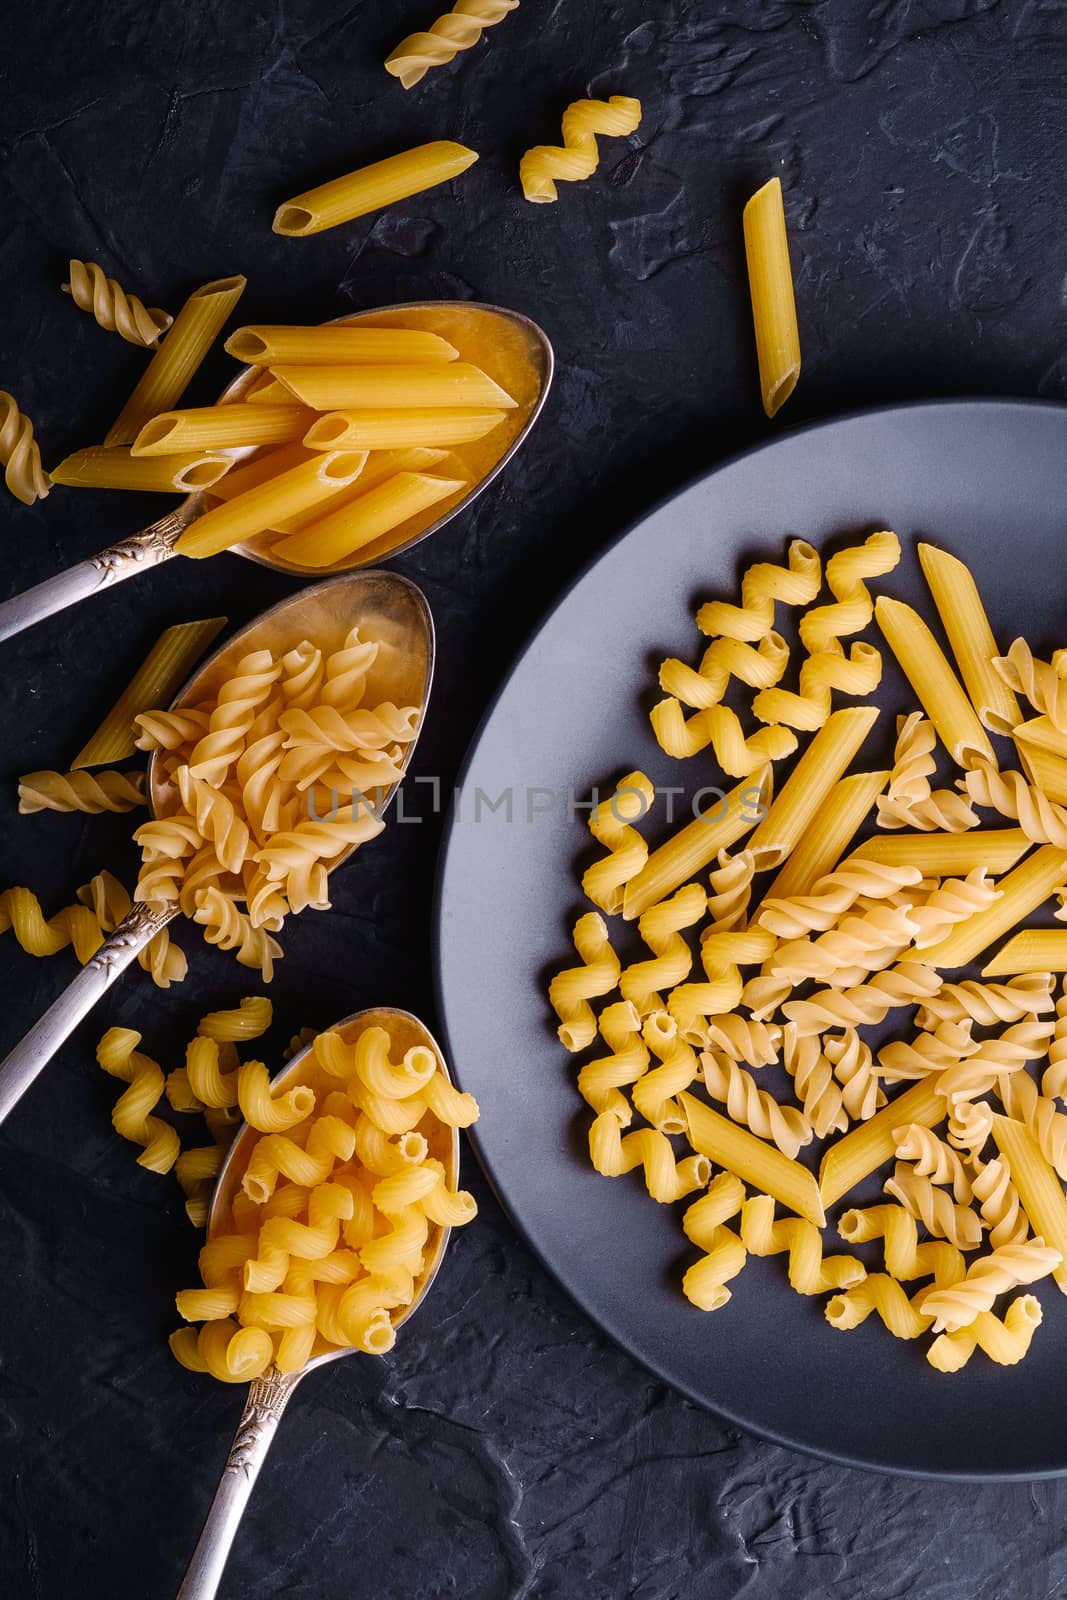 Three cutlery spoons and plate with variety of uncooked golden wheat pasta on dark black textured background, top view